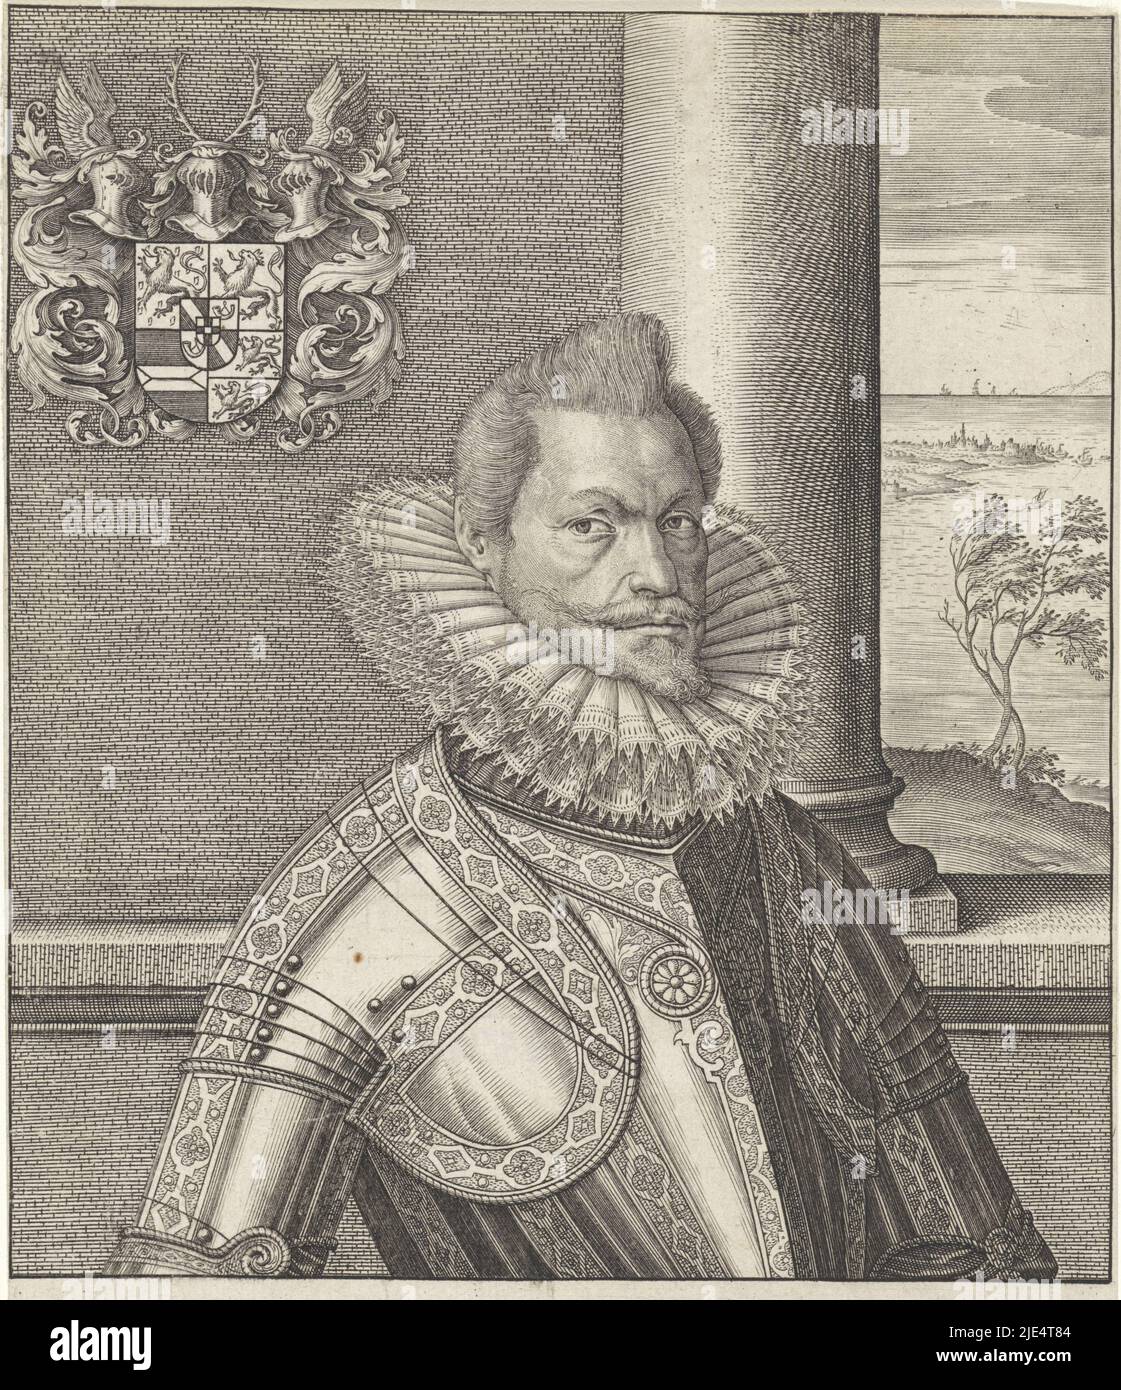 He is wearing a harness. Top left his coat of arms. In the background through the window a view of the sea. In the margin a three-line caption in Latin, Coastal portrait of Philip William, Prince of Orange., print maker: Antonie Wierix (II), (mentioned on object), publisher: Hieronymus Wierix, (mentioned on object), Antwerp, 1565 - before 1604, paper, engraving, h 211 mm × w 153 mm Stock Photo